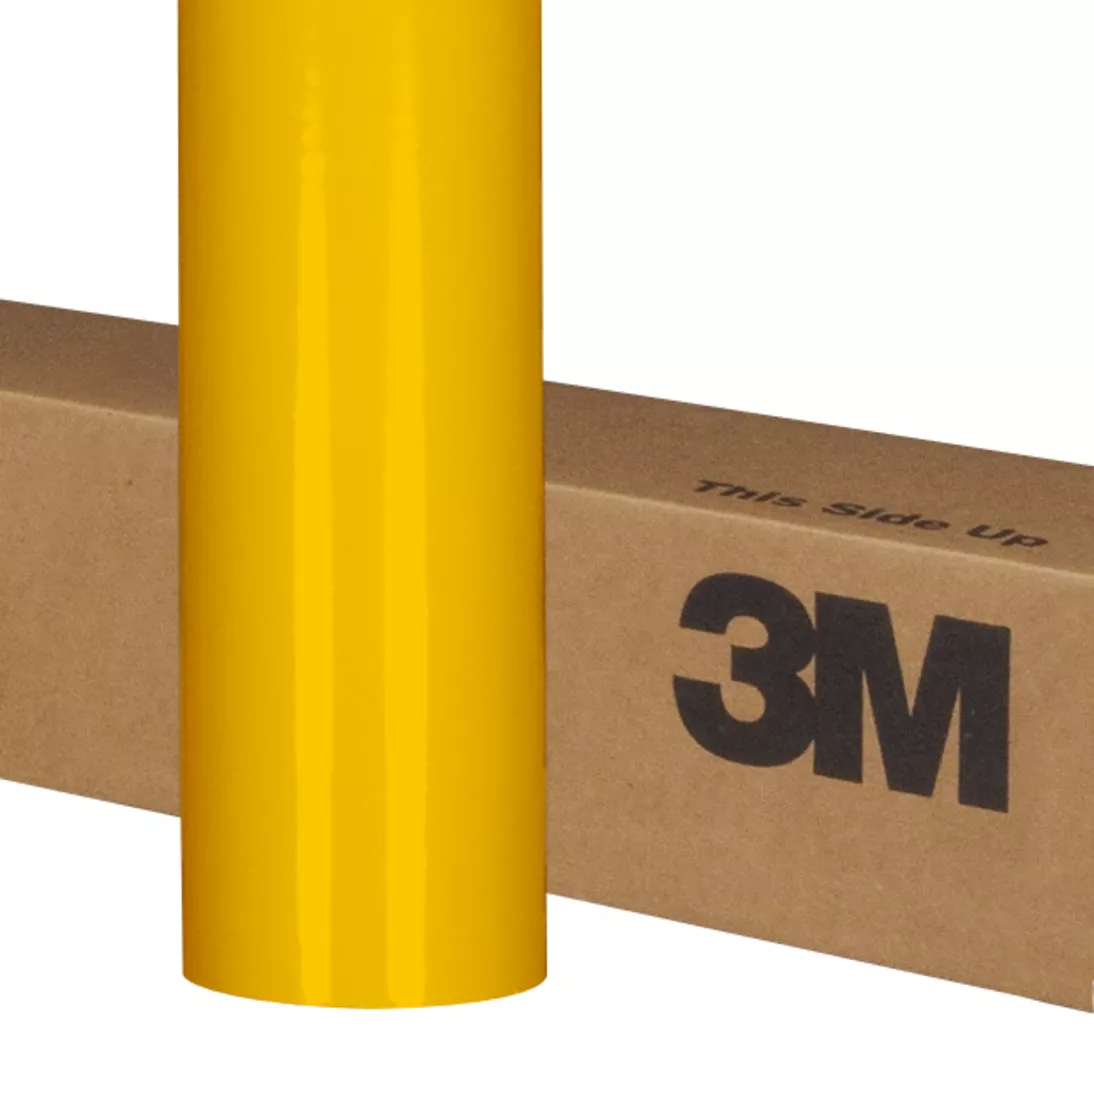 3M™ Scotchcal™ Graphic Film Series 50-27, Sunflower Yellow, 48 in x 50
yd